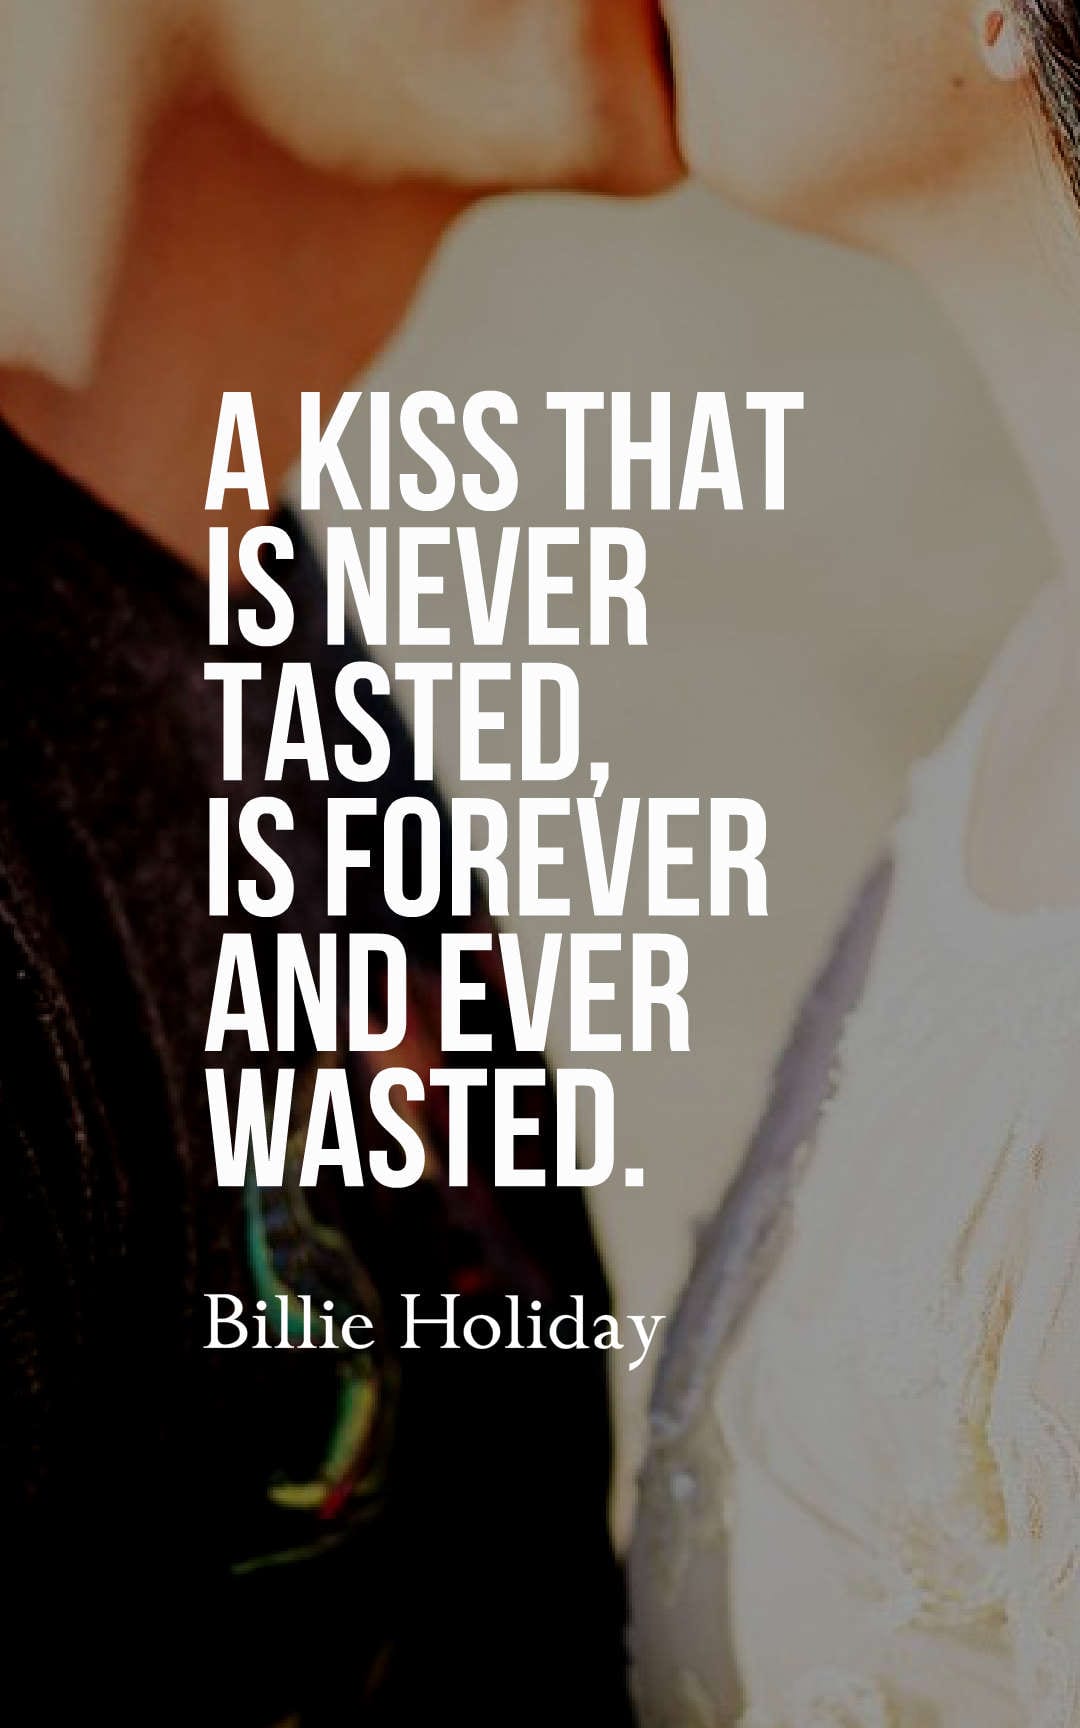 A kiss that is never tasted, is forever and ever wasted.